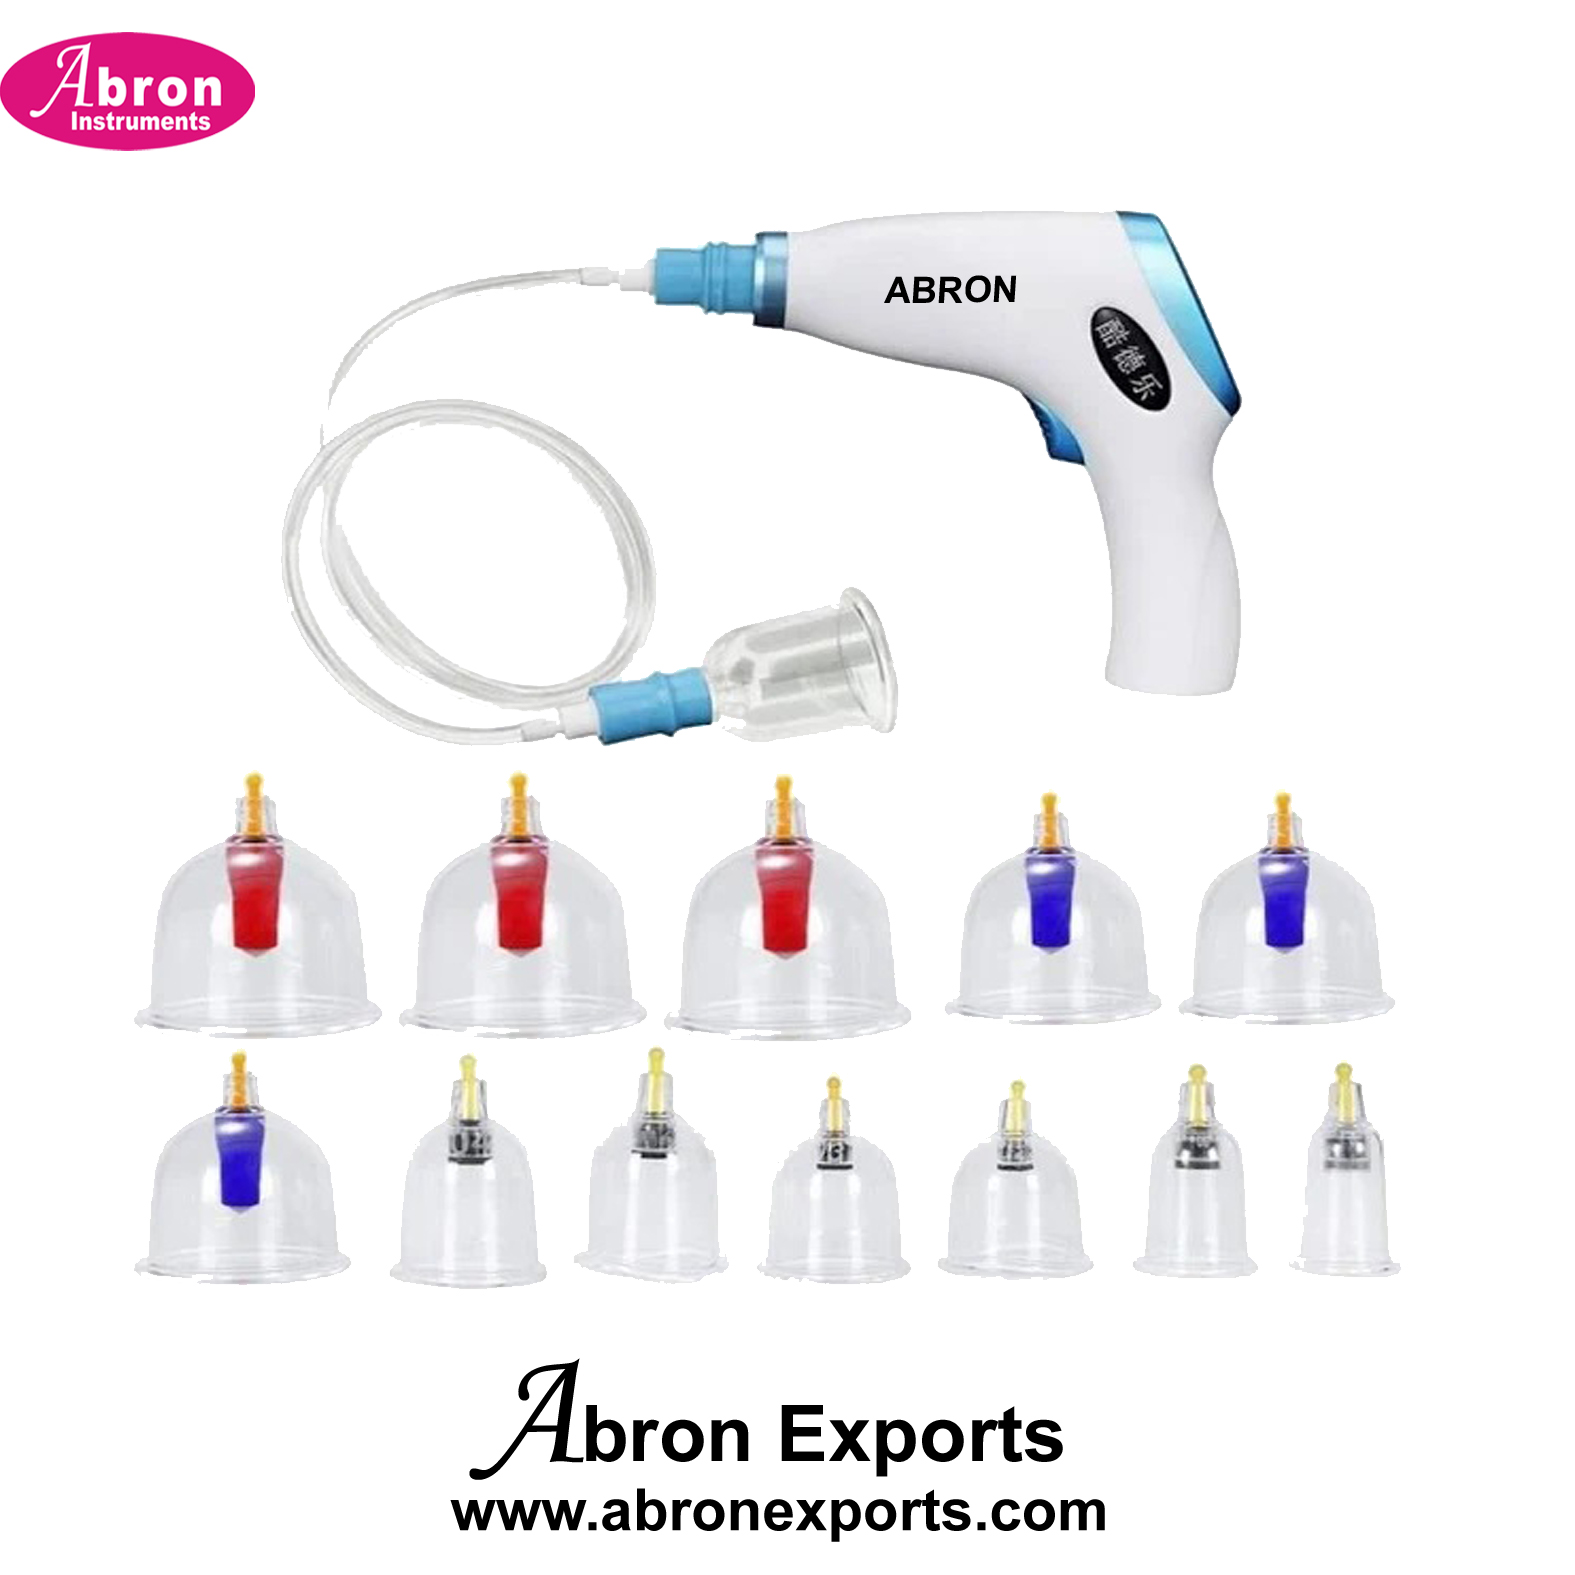 Vacuum cups silicon with Gun electric Ventous Suction with 2 sizes Slic cups hospital Nursing Home Abron ABM-2312CS 